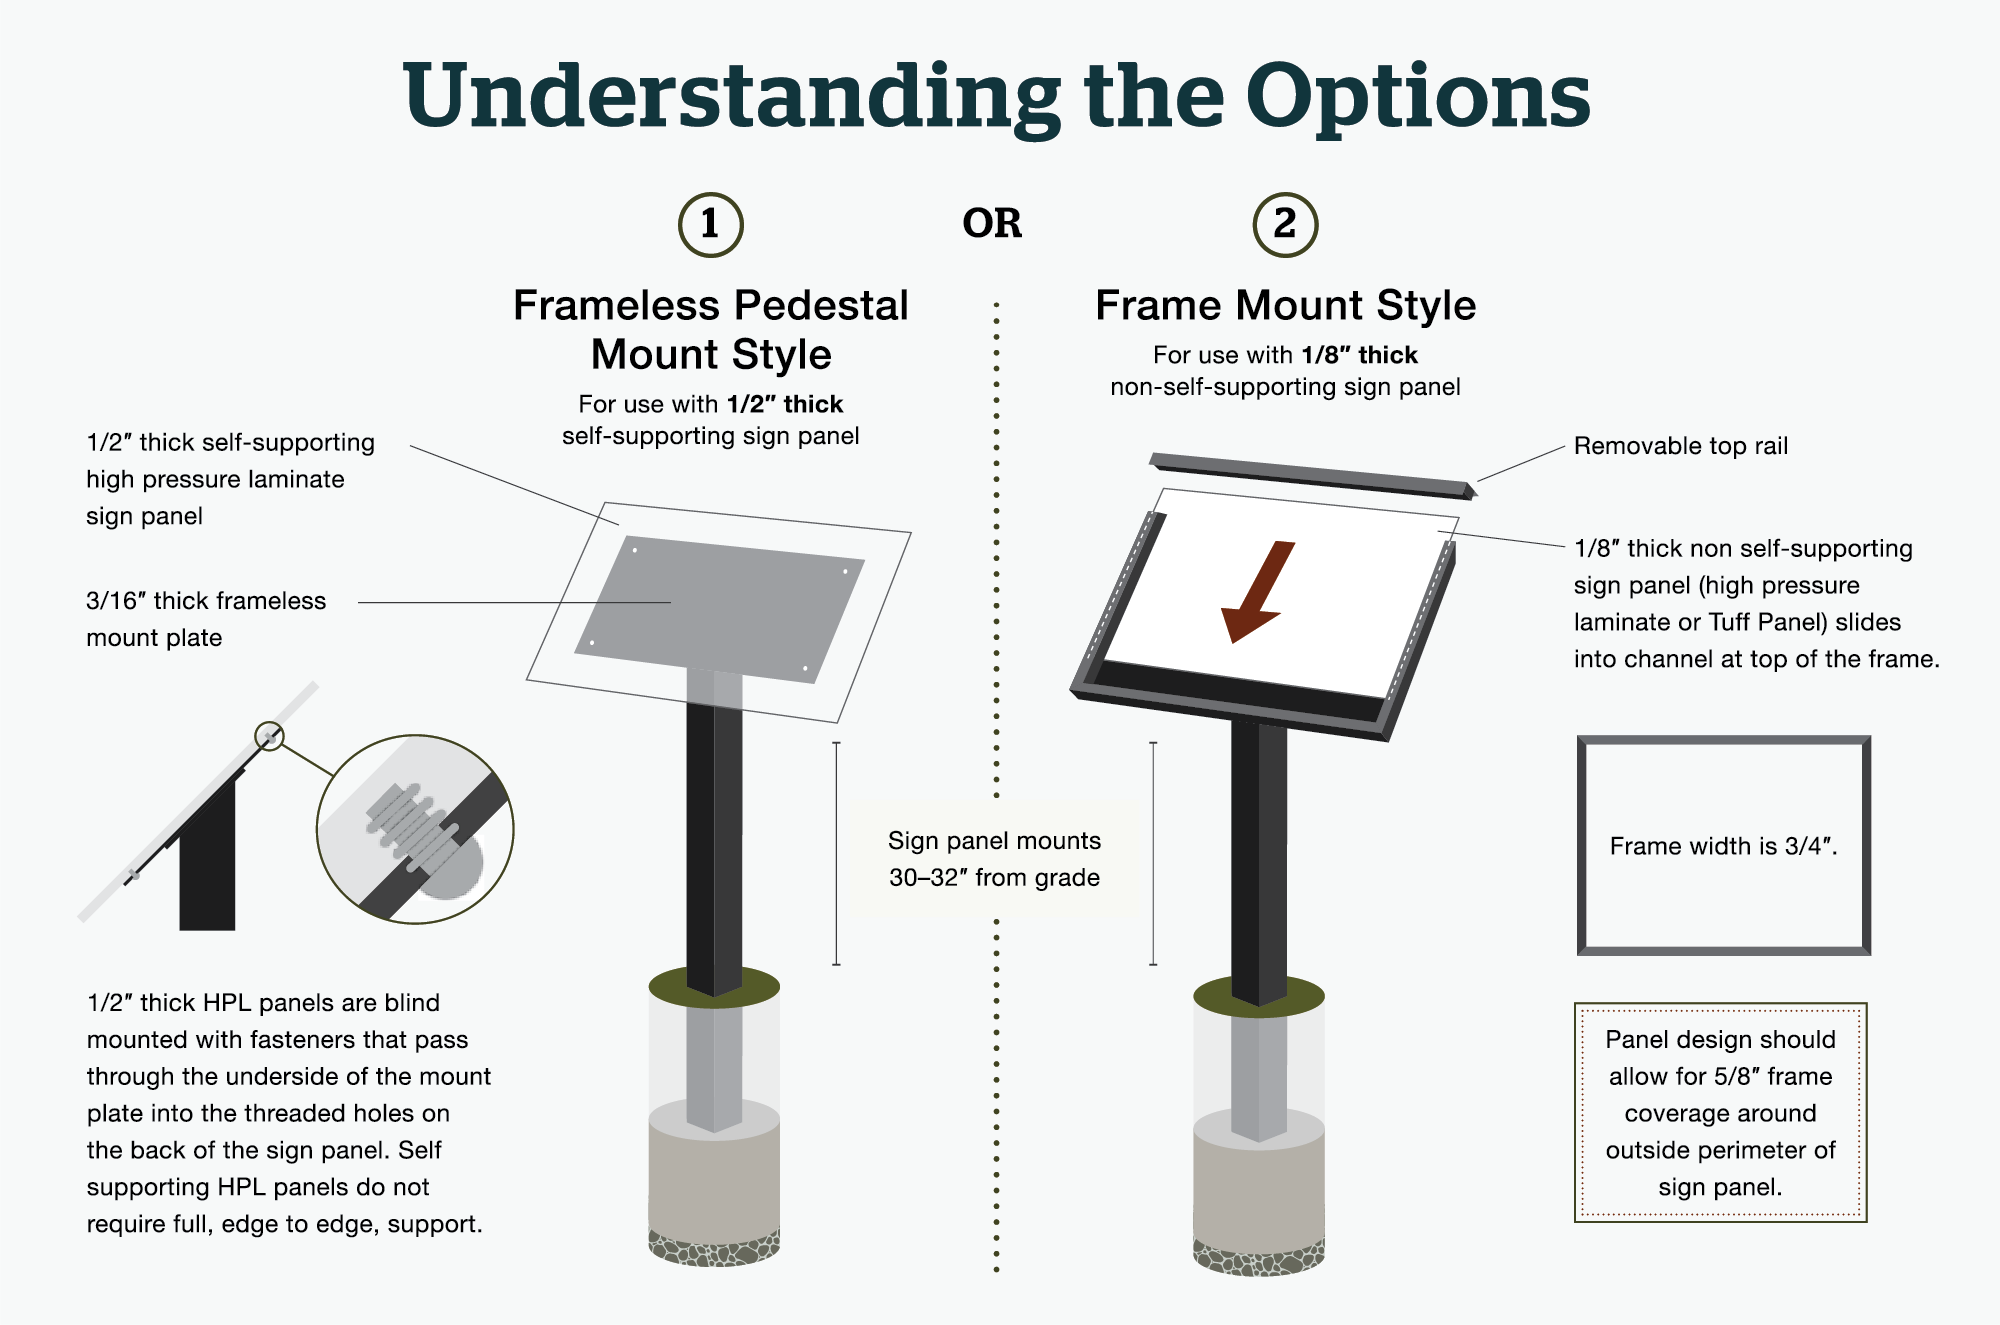 Details and specifications of frame and frameless angle mount styles